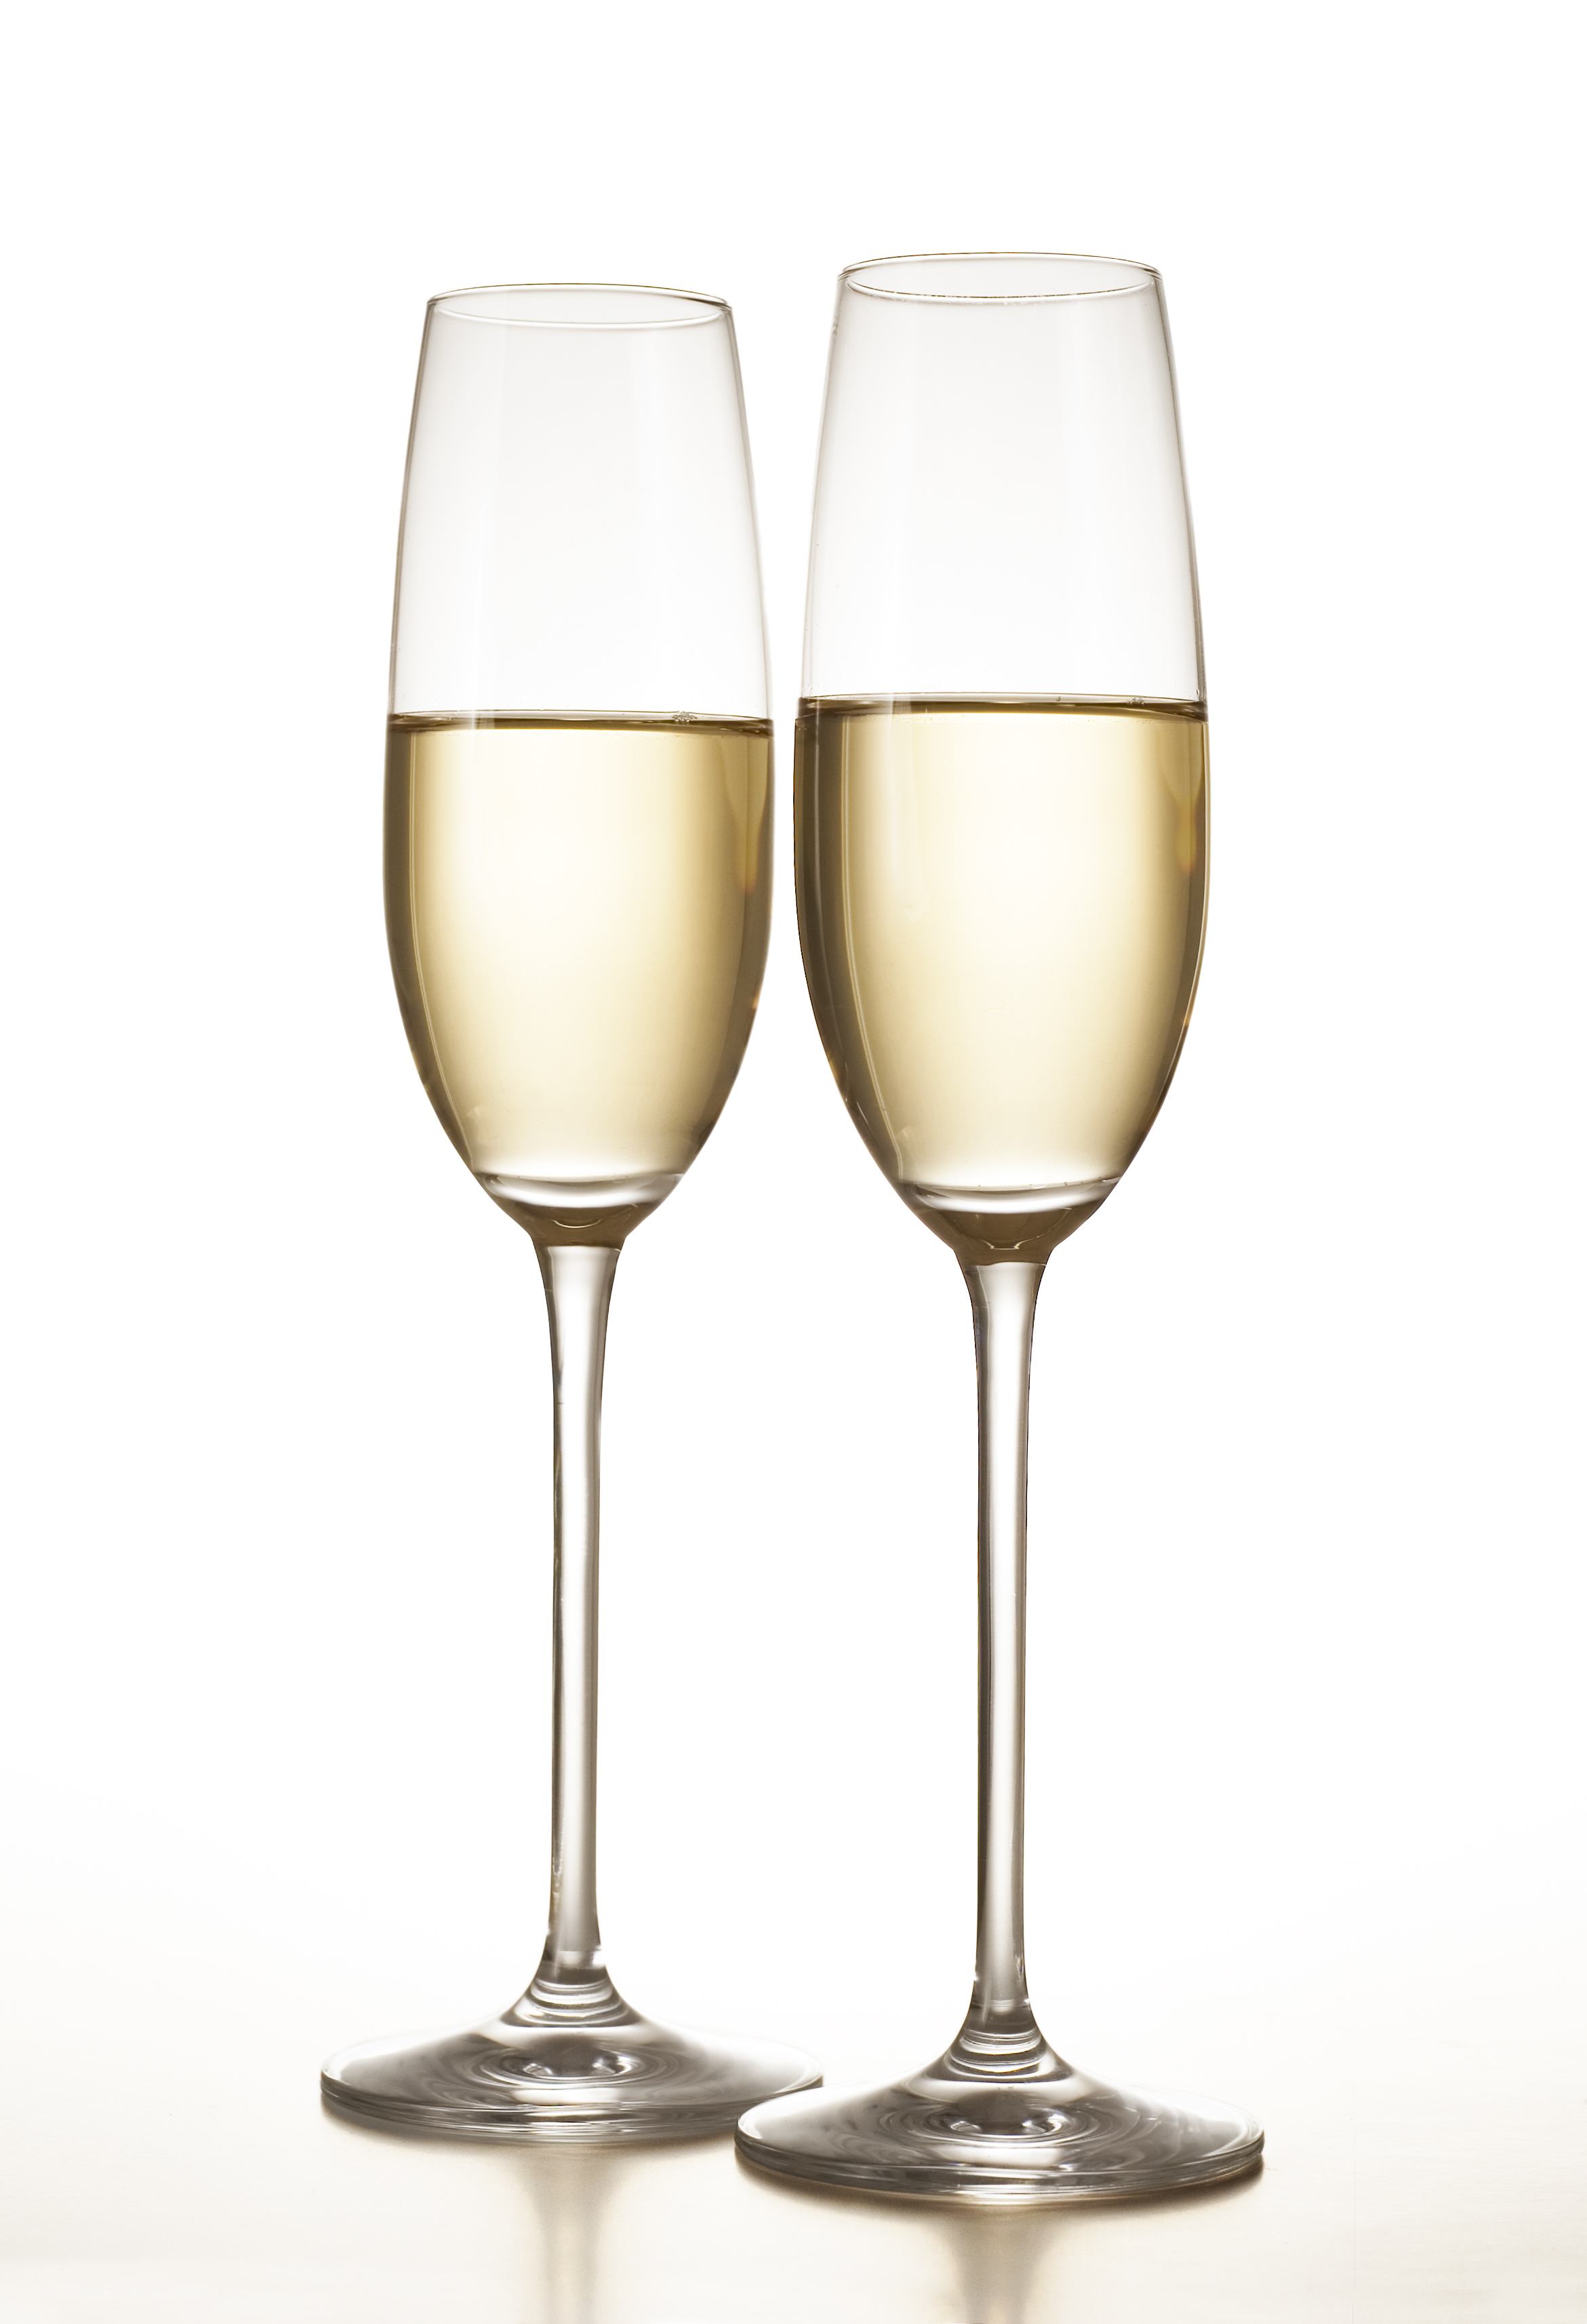 Champagne Glasses Png Clipart - Clear champagne flute glass, champagne ...